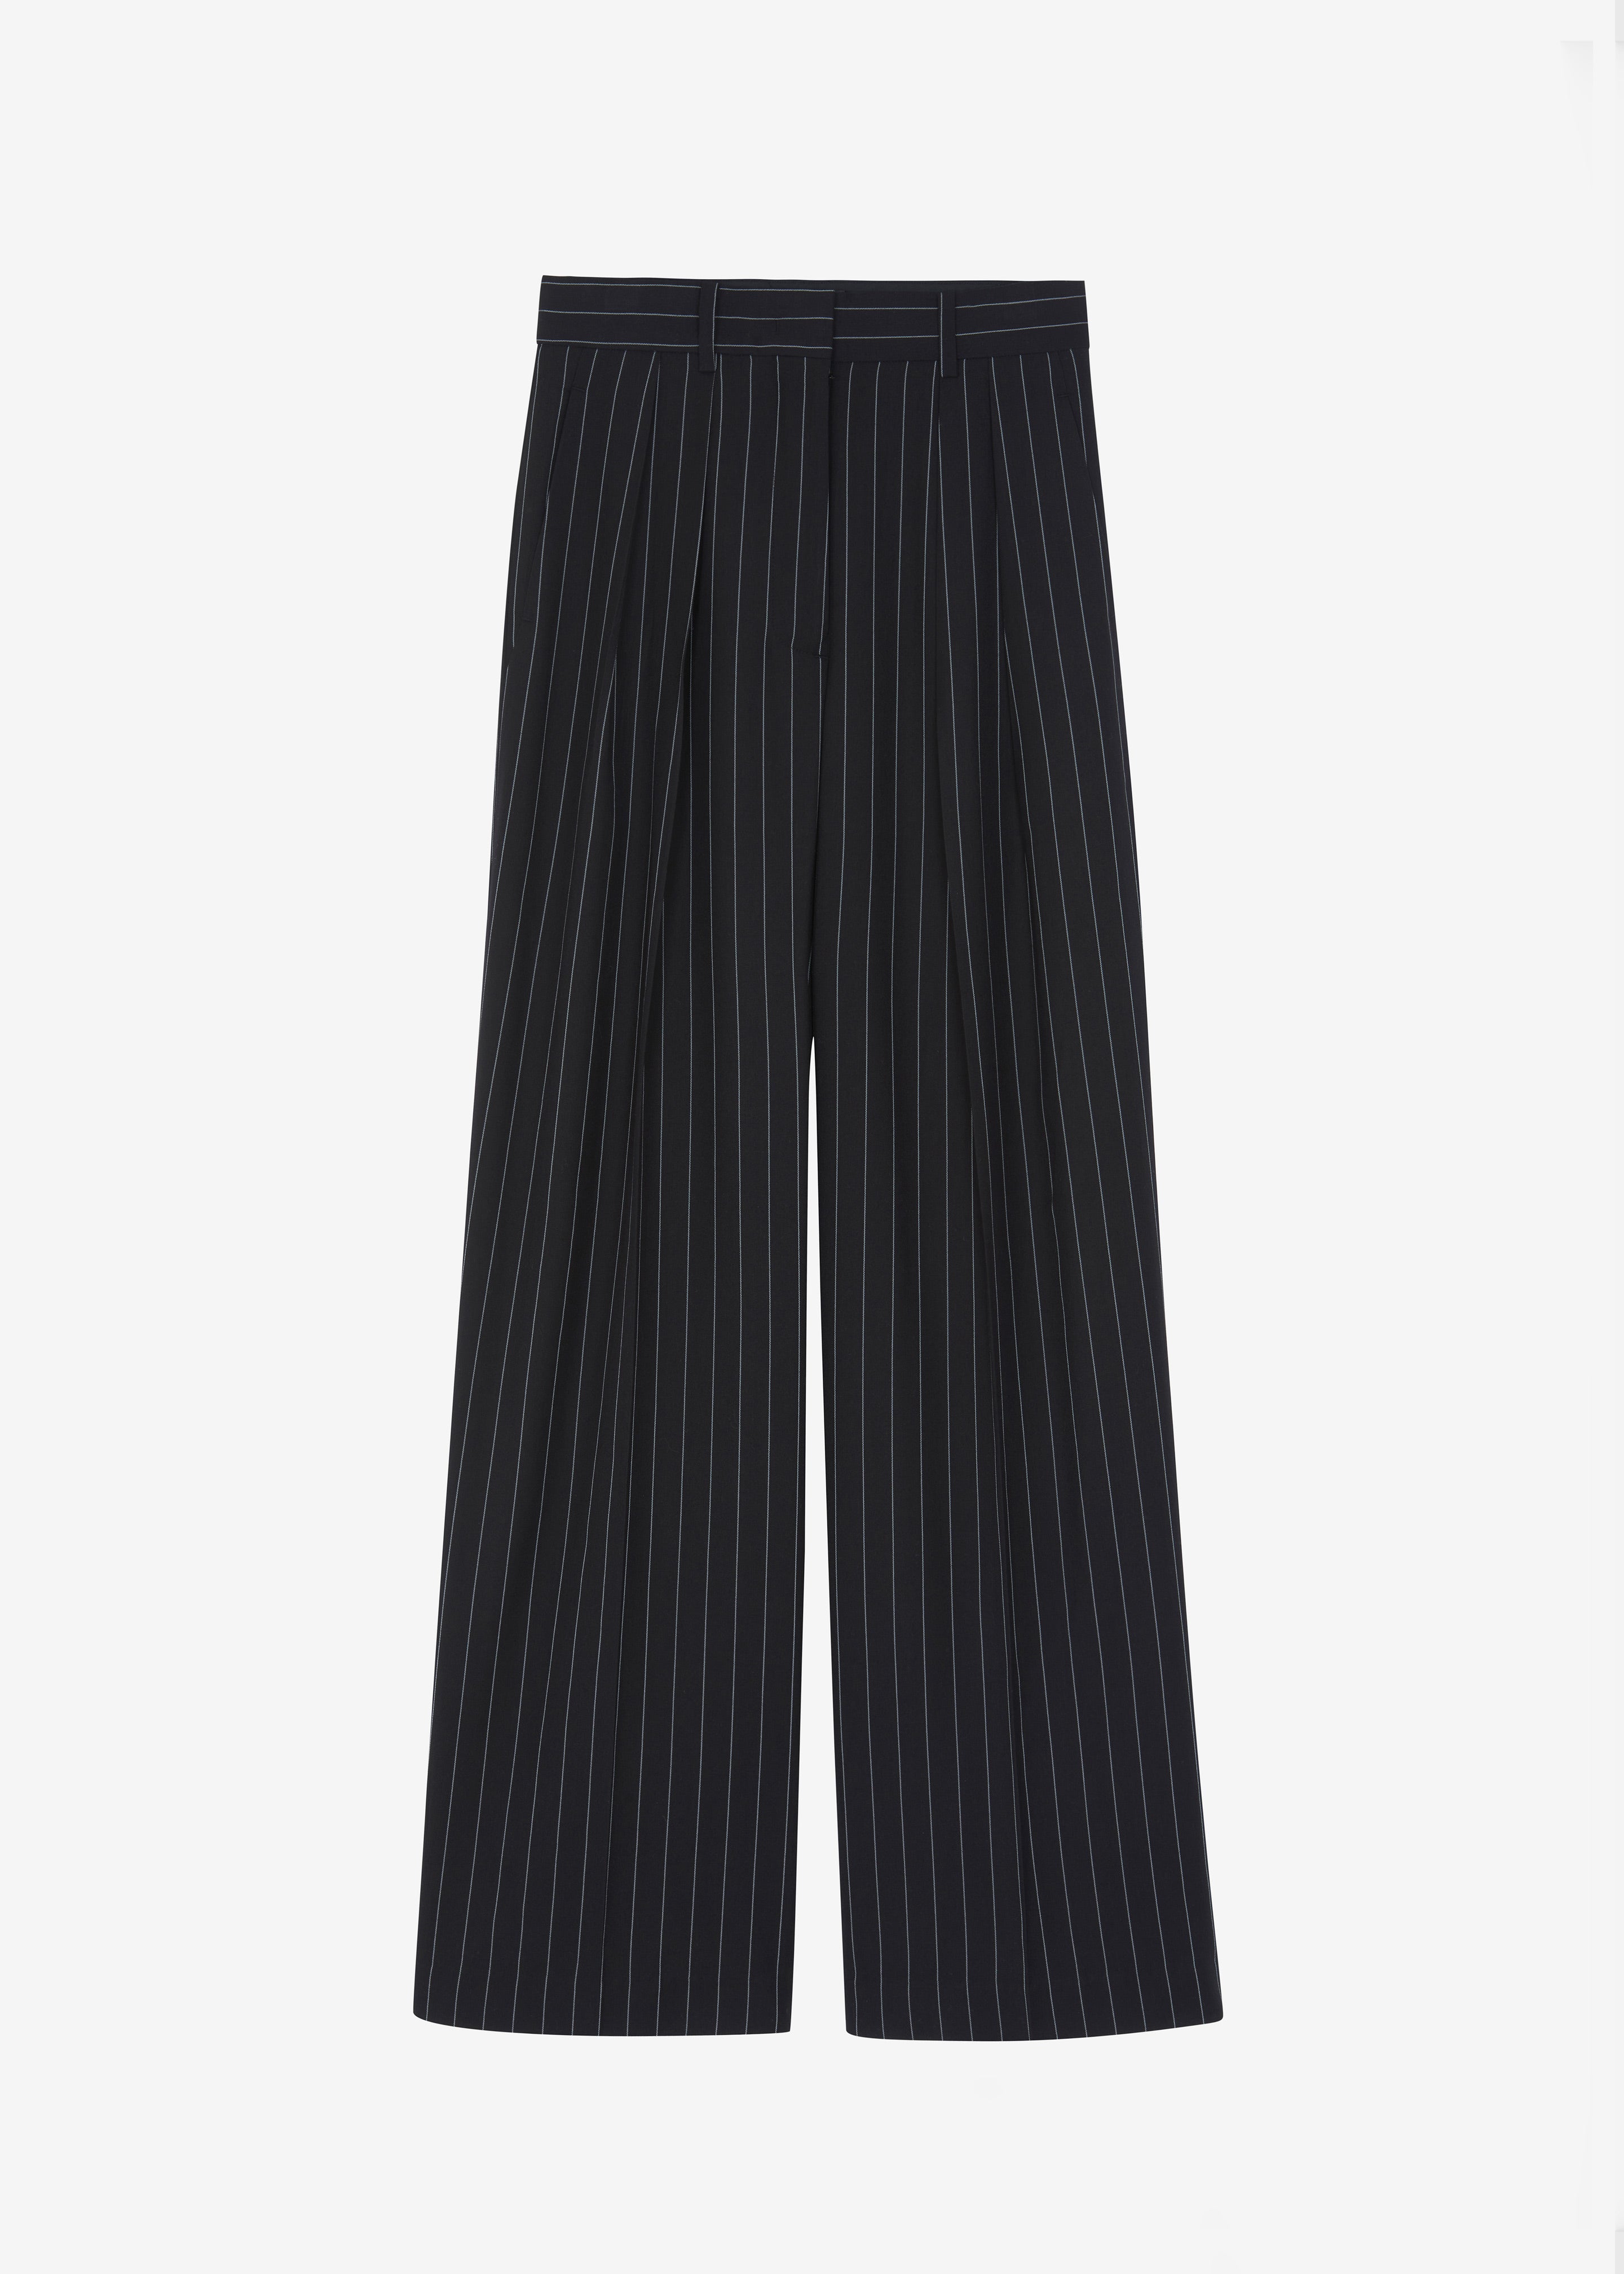 Holland Pleated Trousers - Black/White Pinstripe - 9